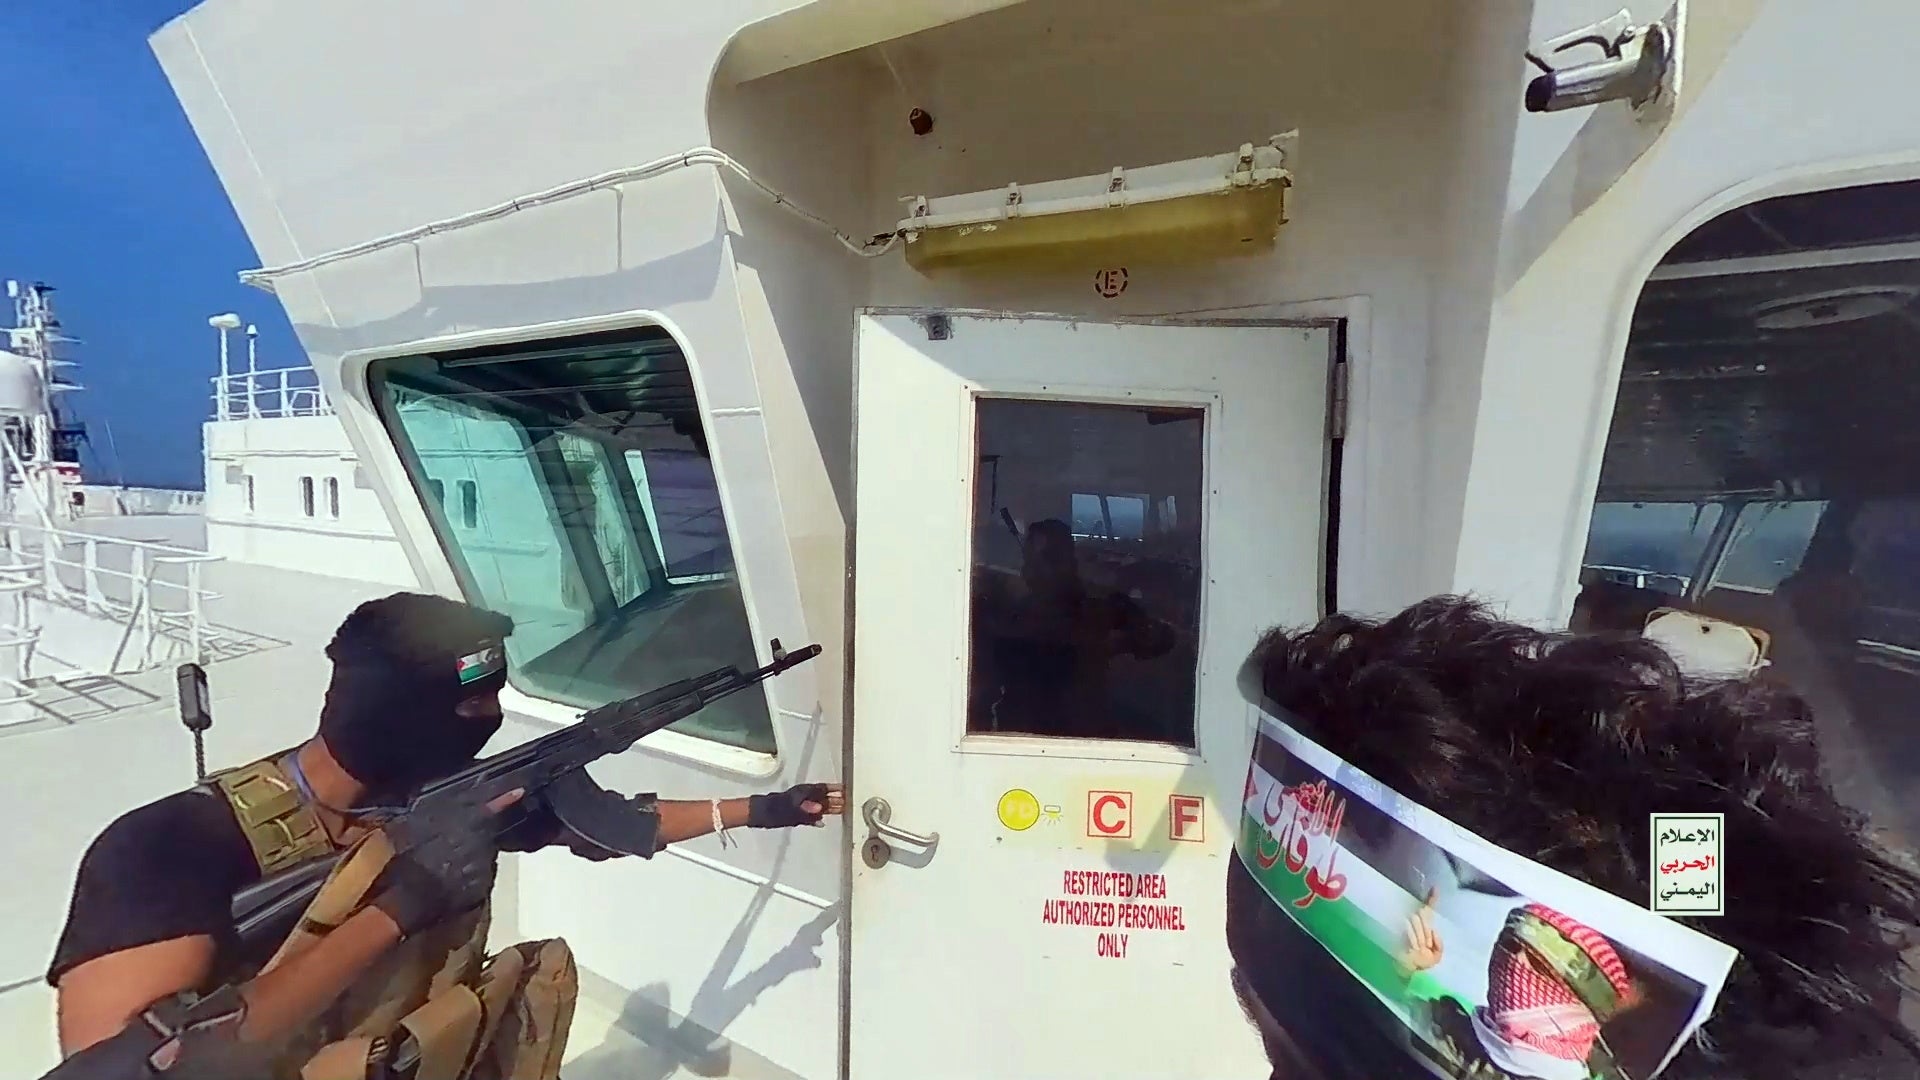 Houthi fighters seize cargo ship in the Red Sea off Yemen coasts